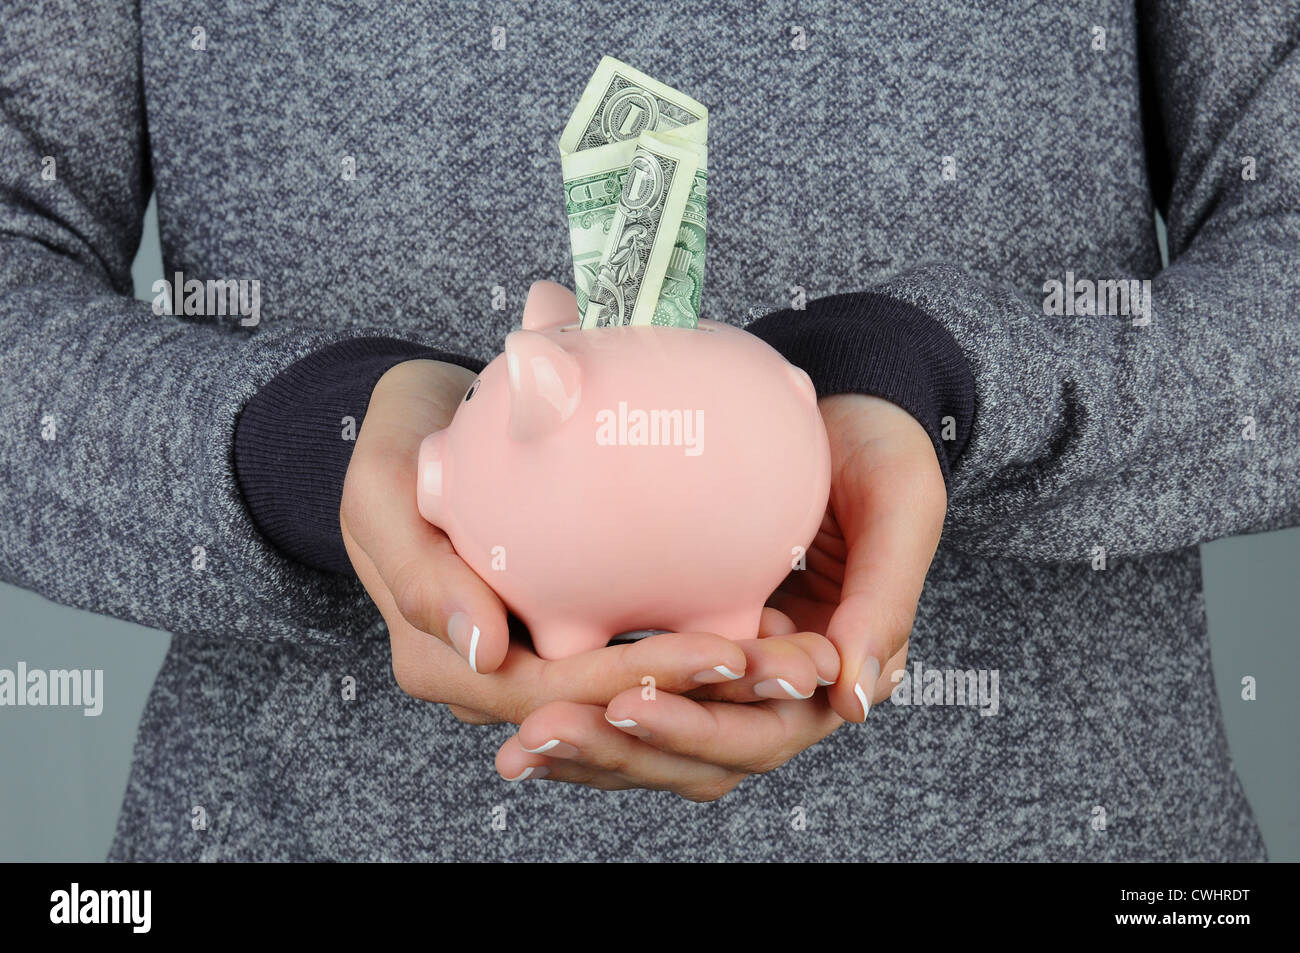 Closeup of a woman holding a piggy bank in front of her body. Bank has a dollar bill sticking in the top slot. Stock Photo